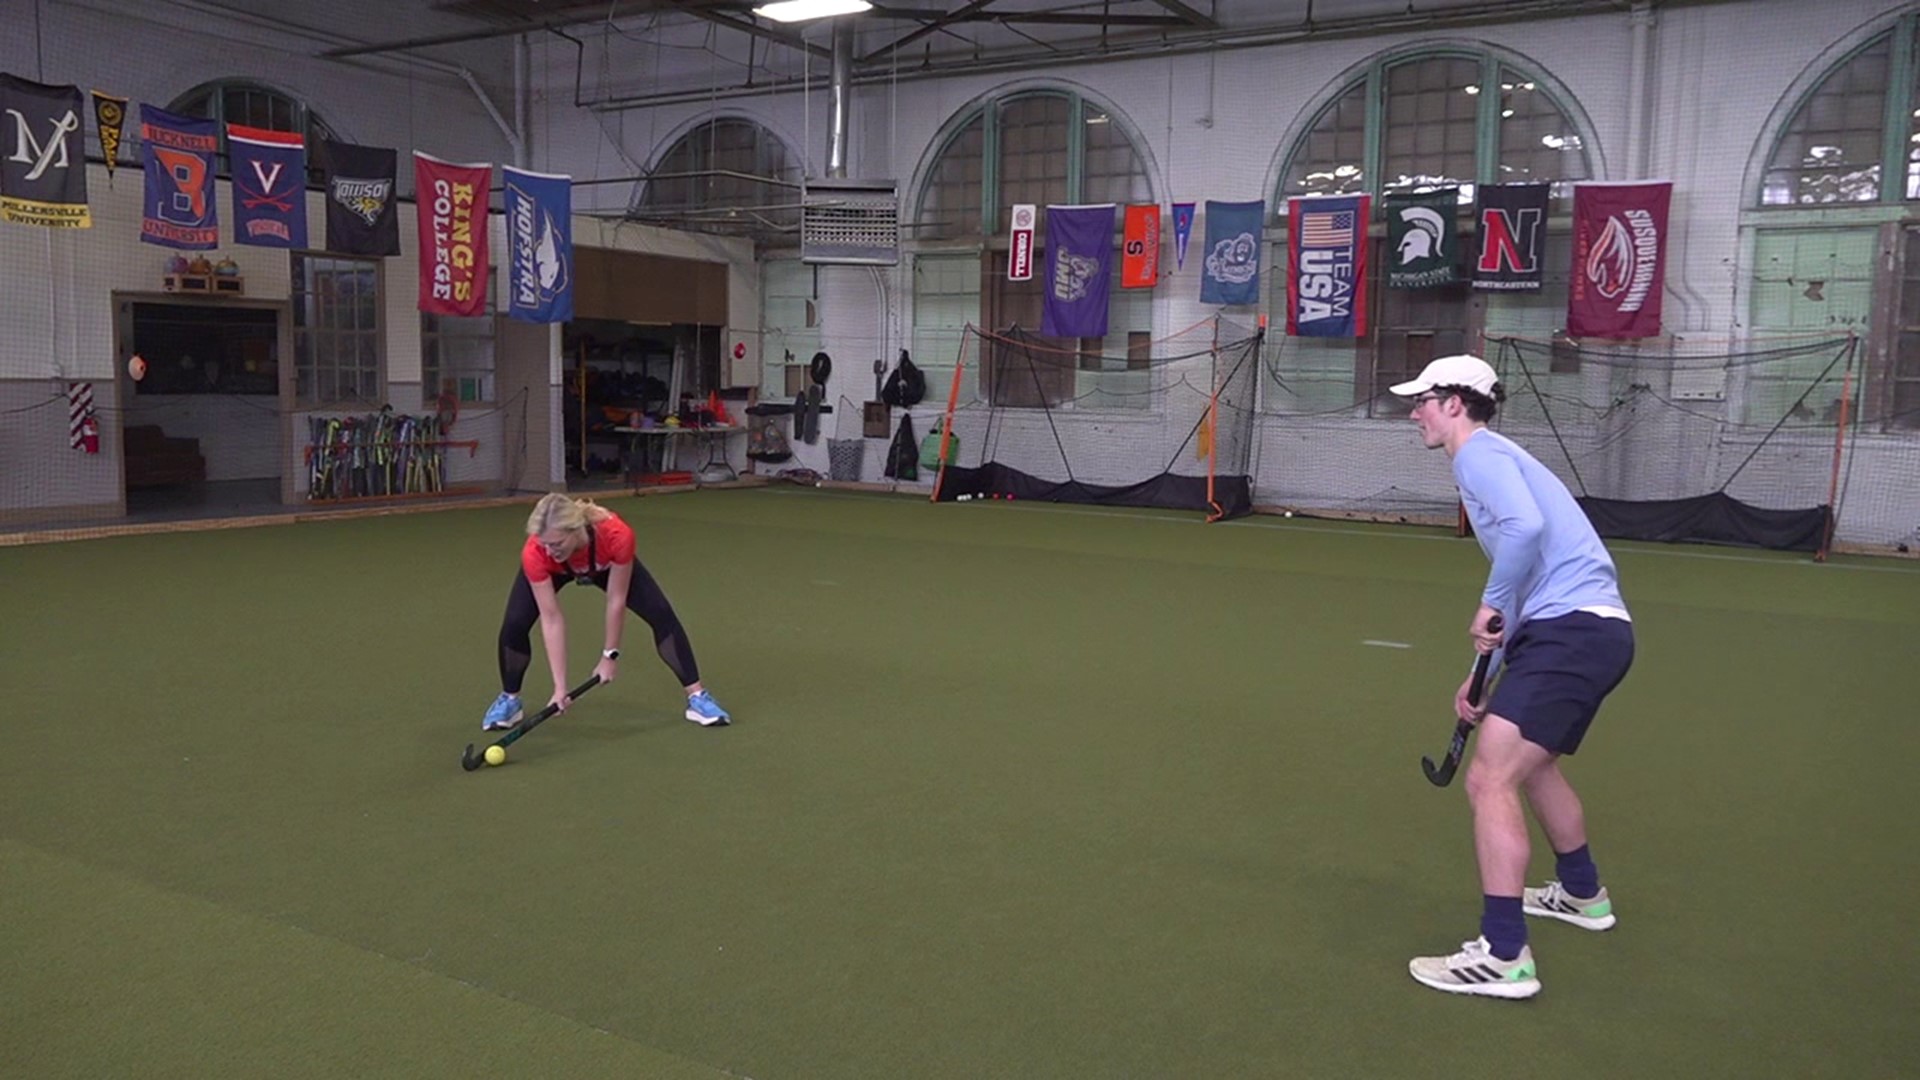 A high school senior in Luzerne County is getting ready to head to Canada to compete with the Senior U.S. Men's National Indoor Field Hockey Team.